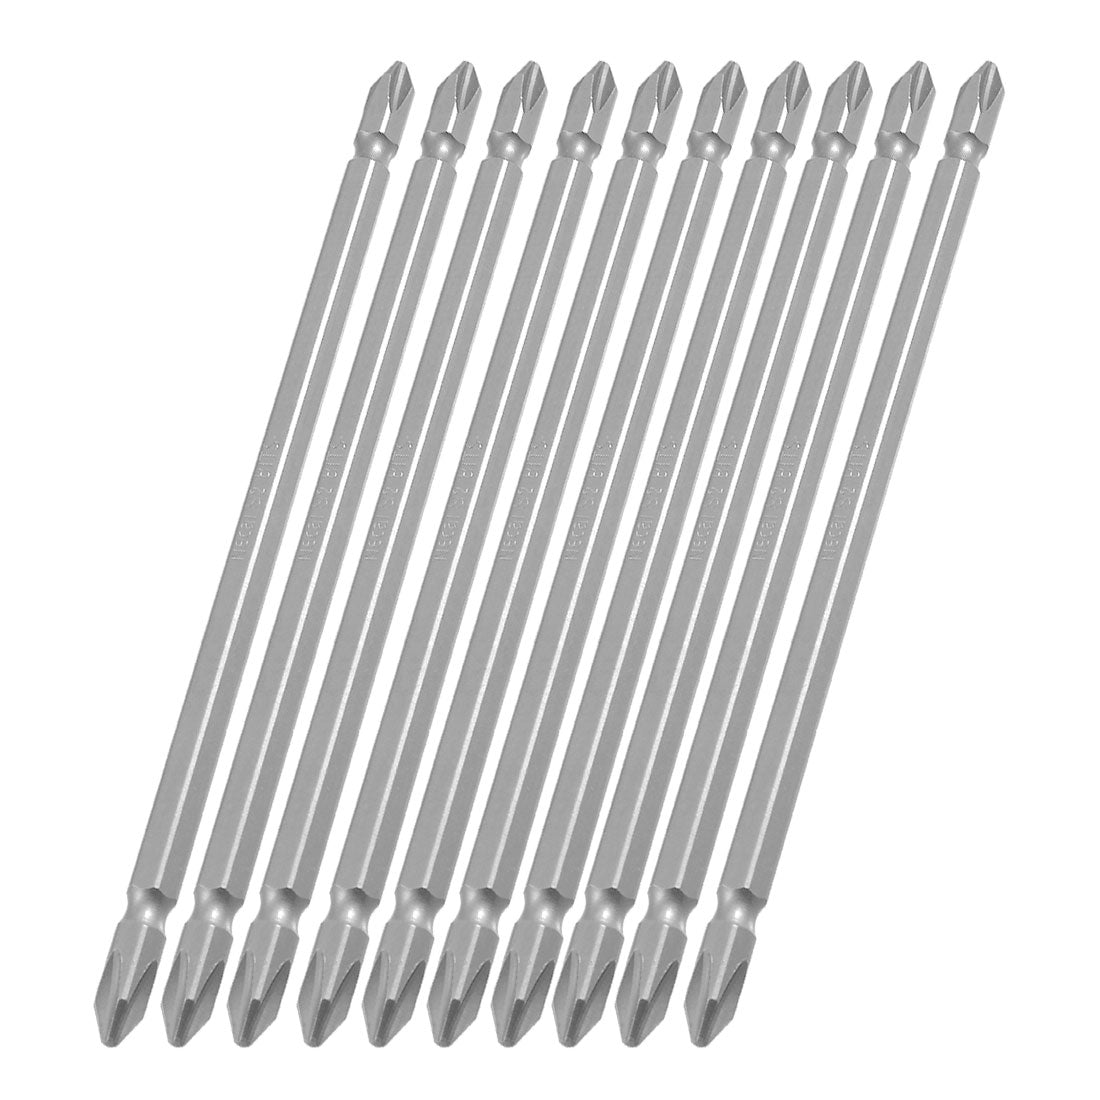 uxcell Uxcell 10Pcs 1/4" Hex Shank 150mm Long 6mm Double End PH2 Phillips Screwdriver Bits